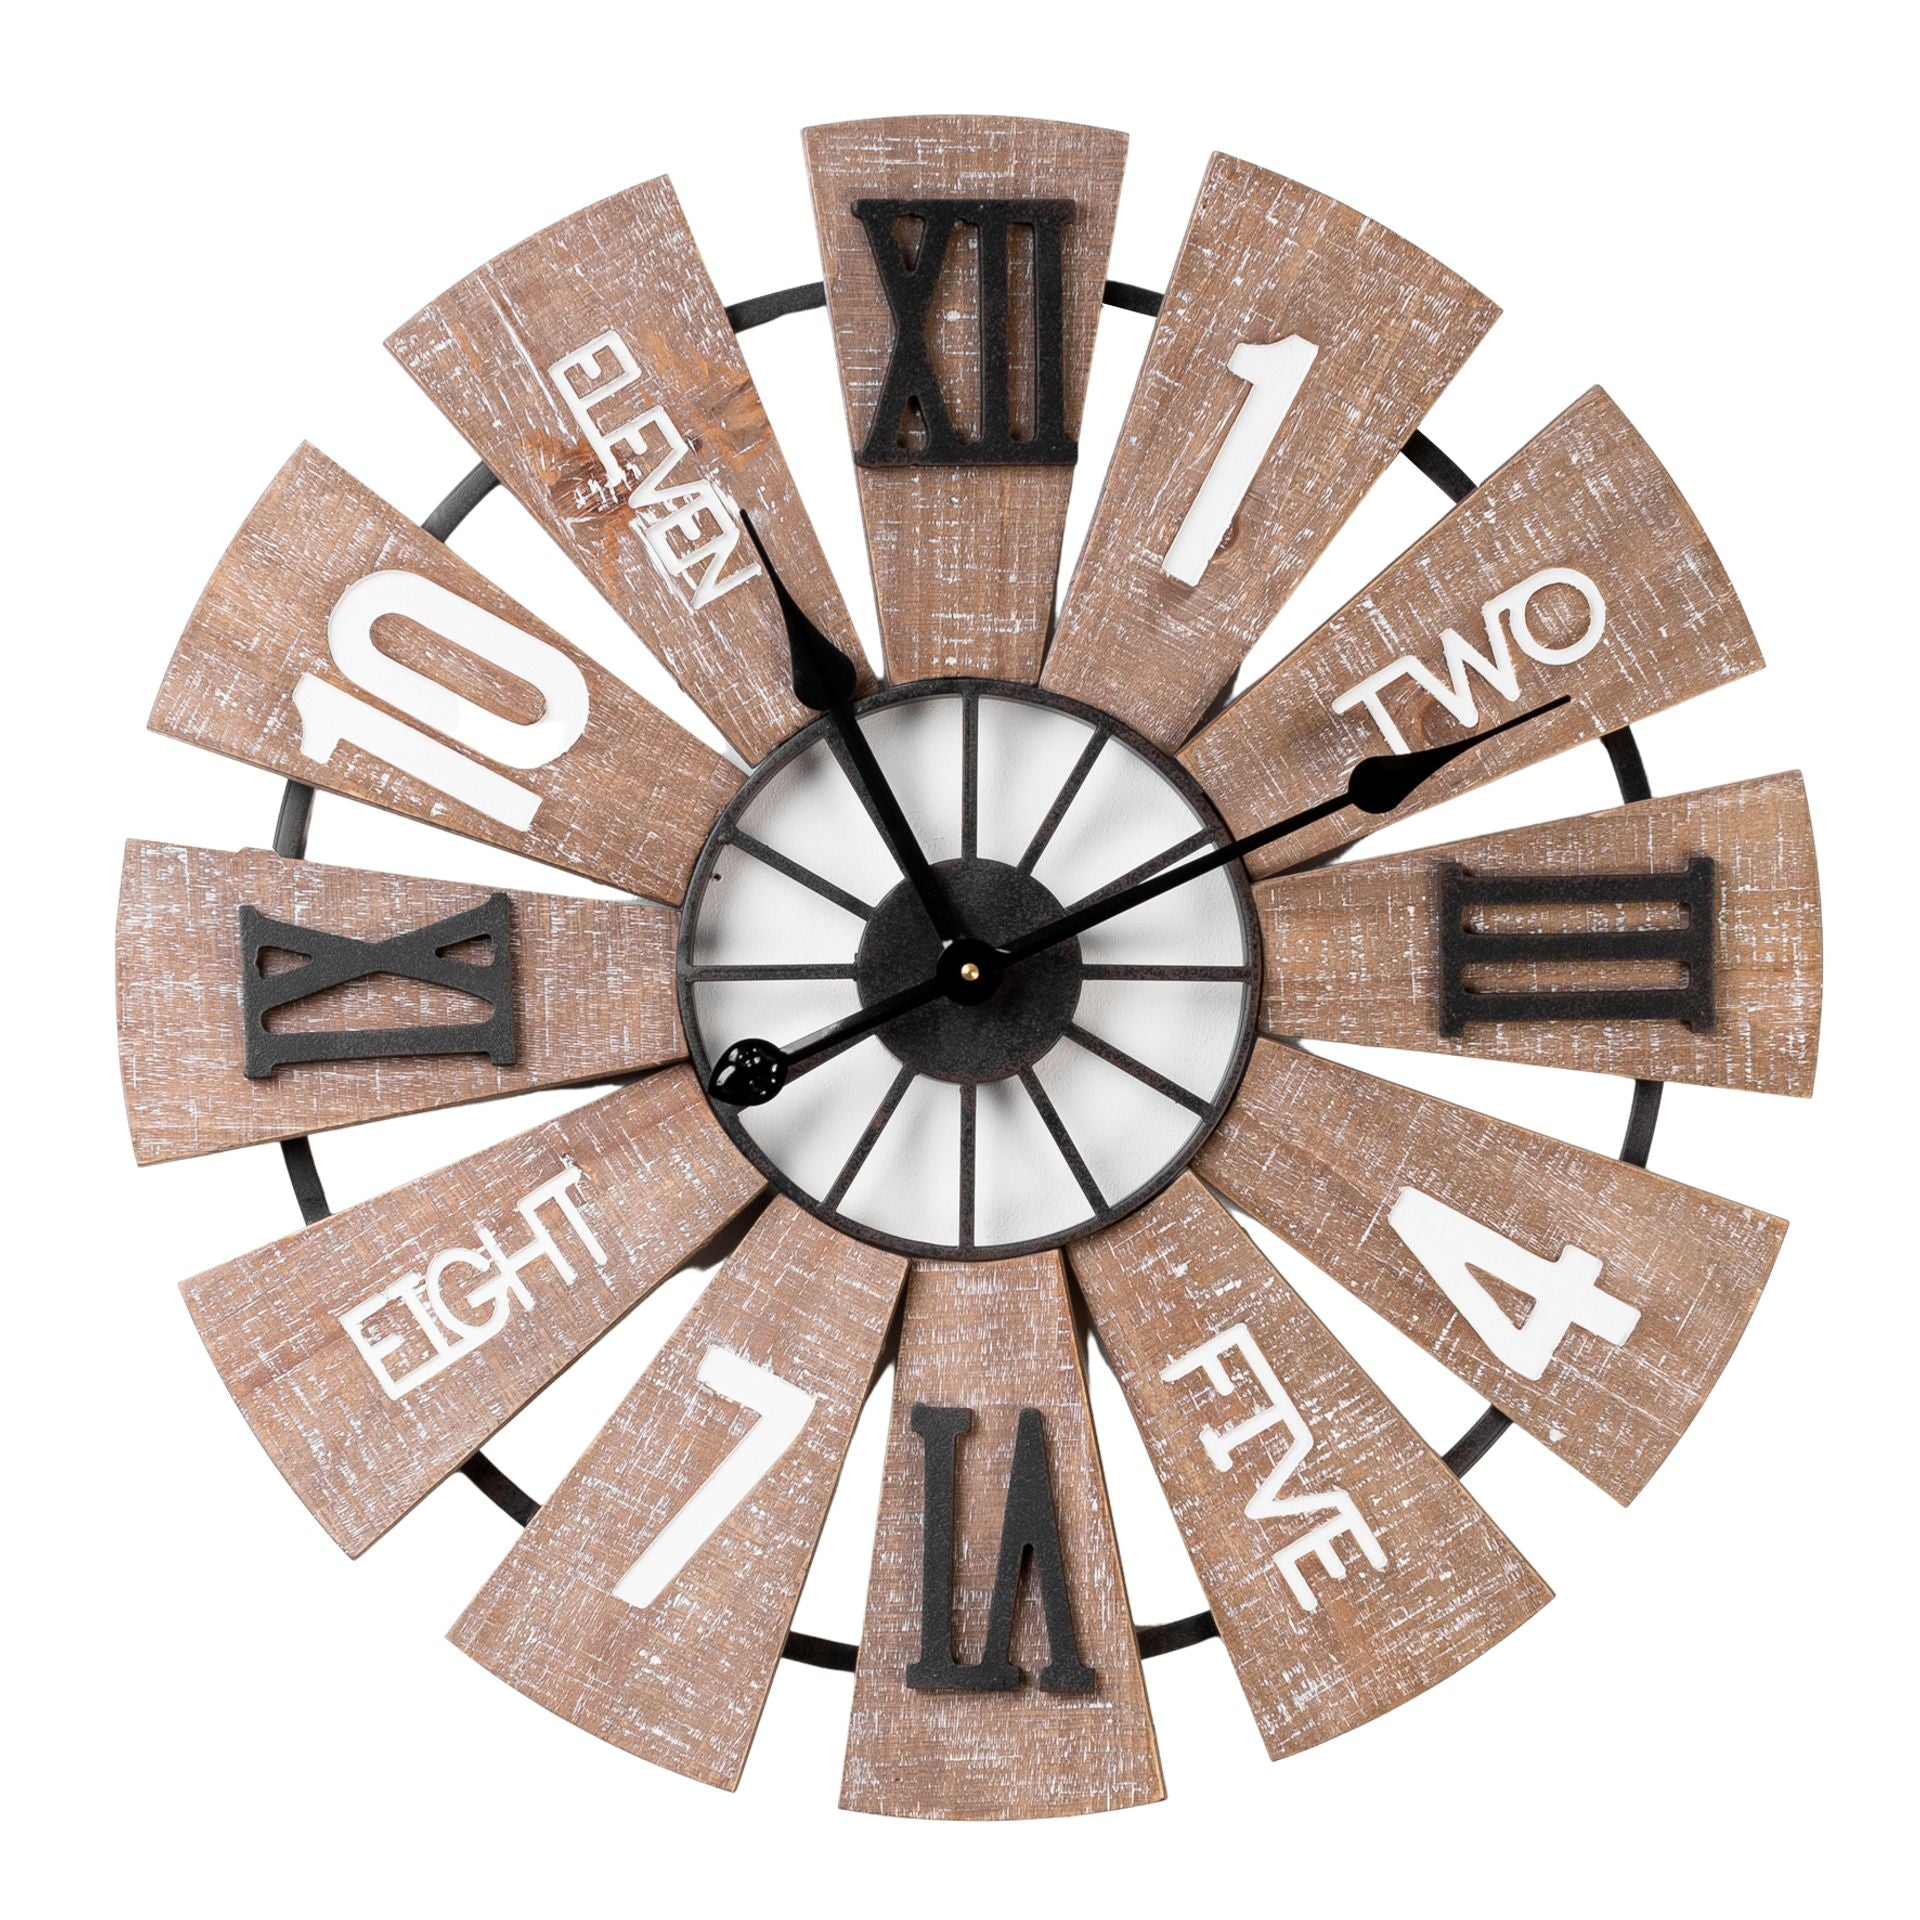 Hometime Metal and Wooden Wall Clock - Large 60cm